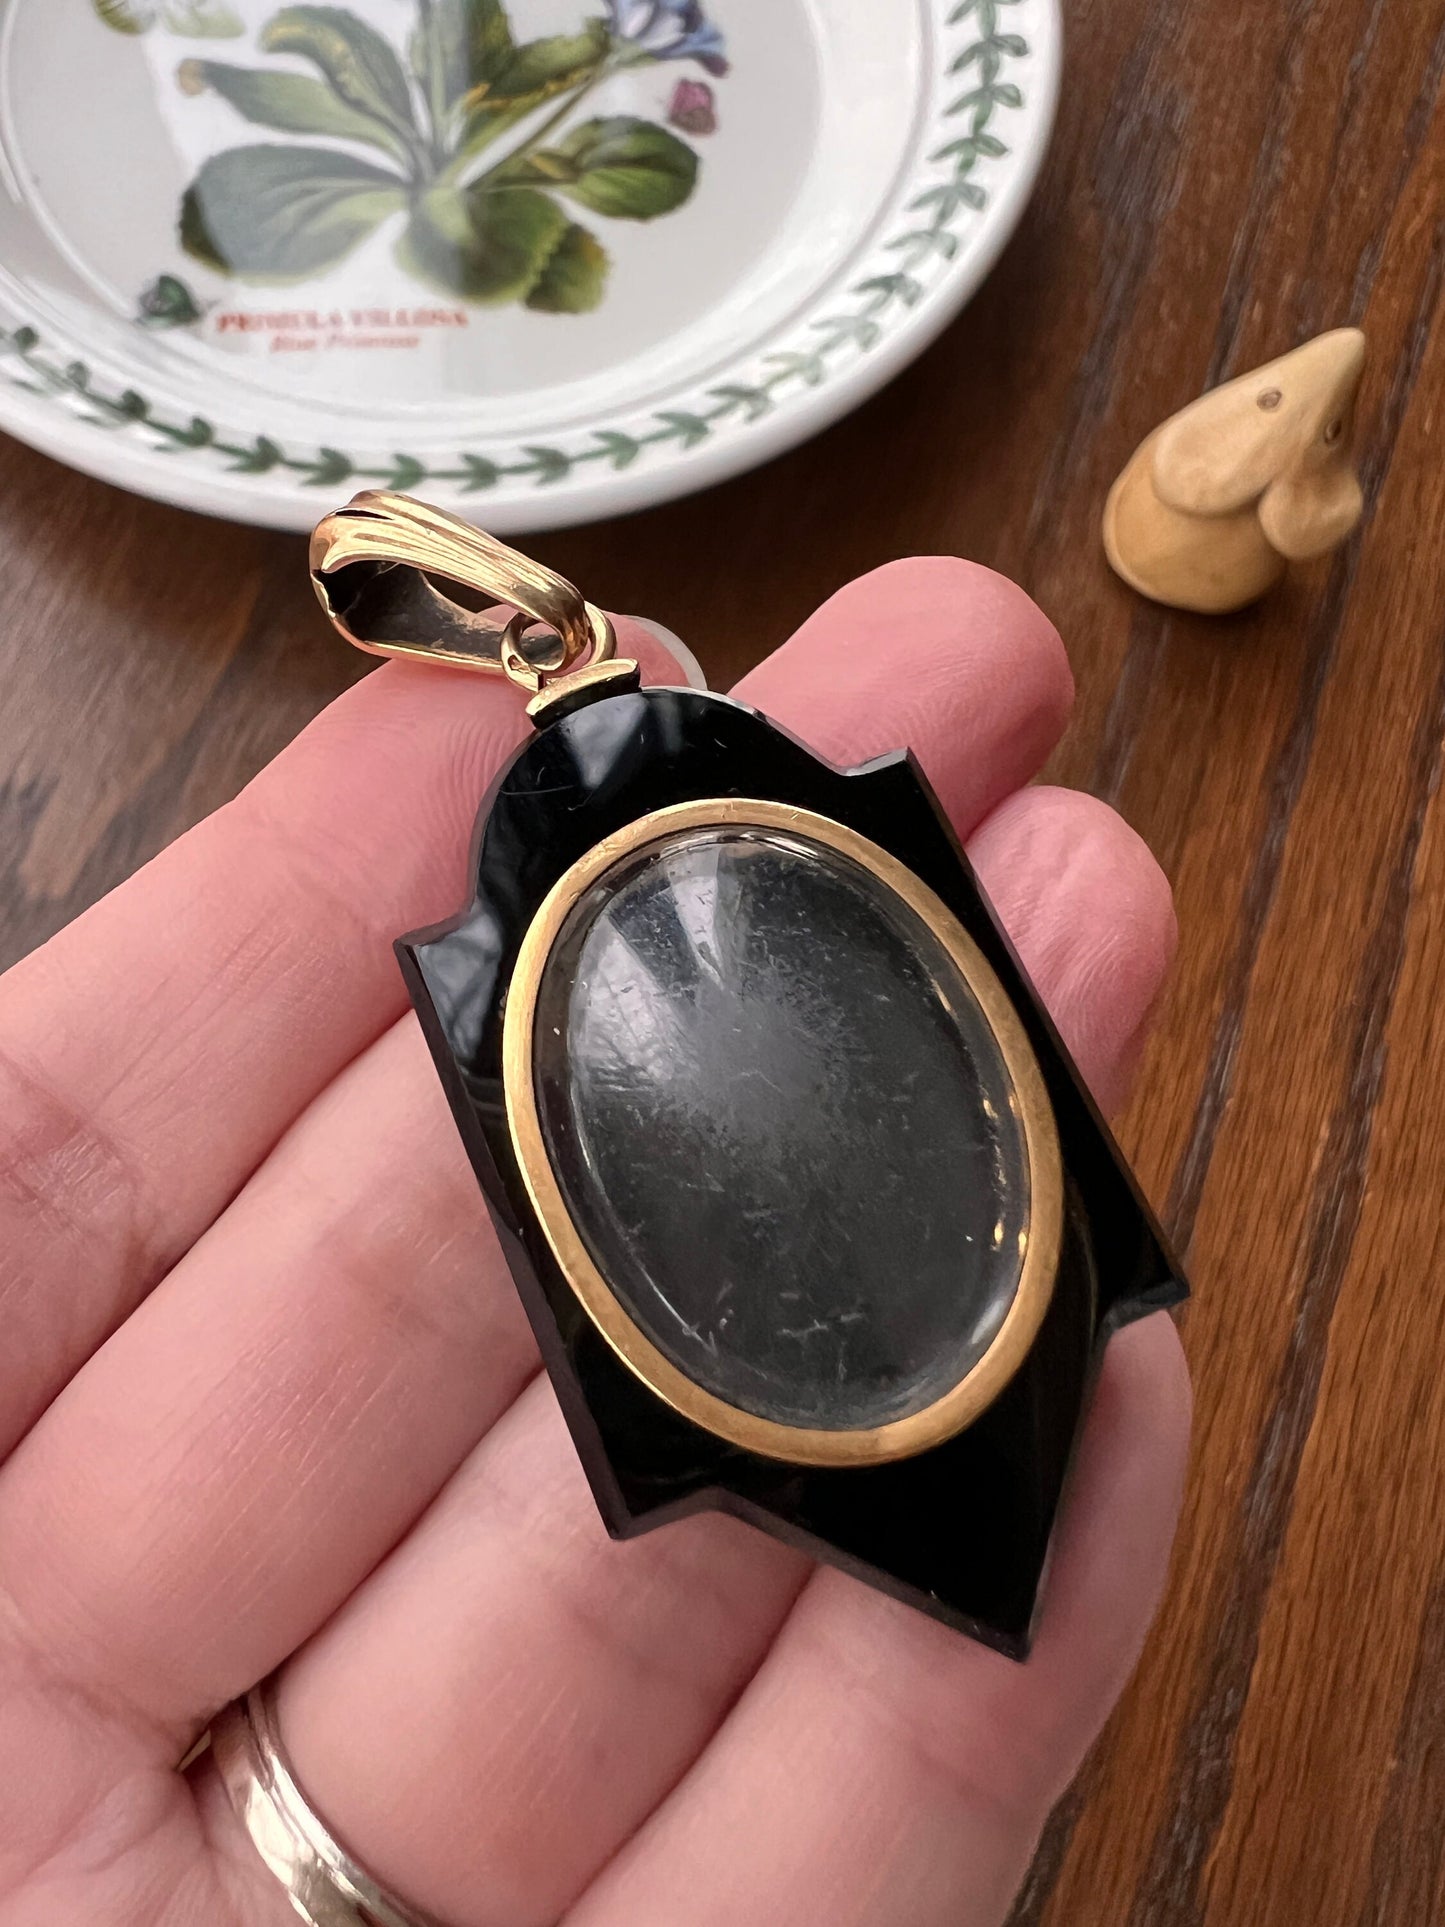 LARGE French Antique Black Onyx SHIELD Chunky Mourning Locket Pendant 18k Gold Victorian Unique Gift Geometric Gothic Statement Neckmess